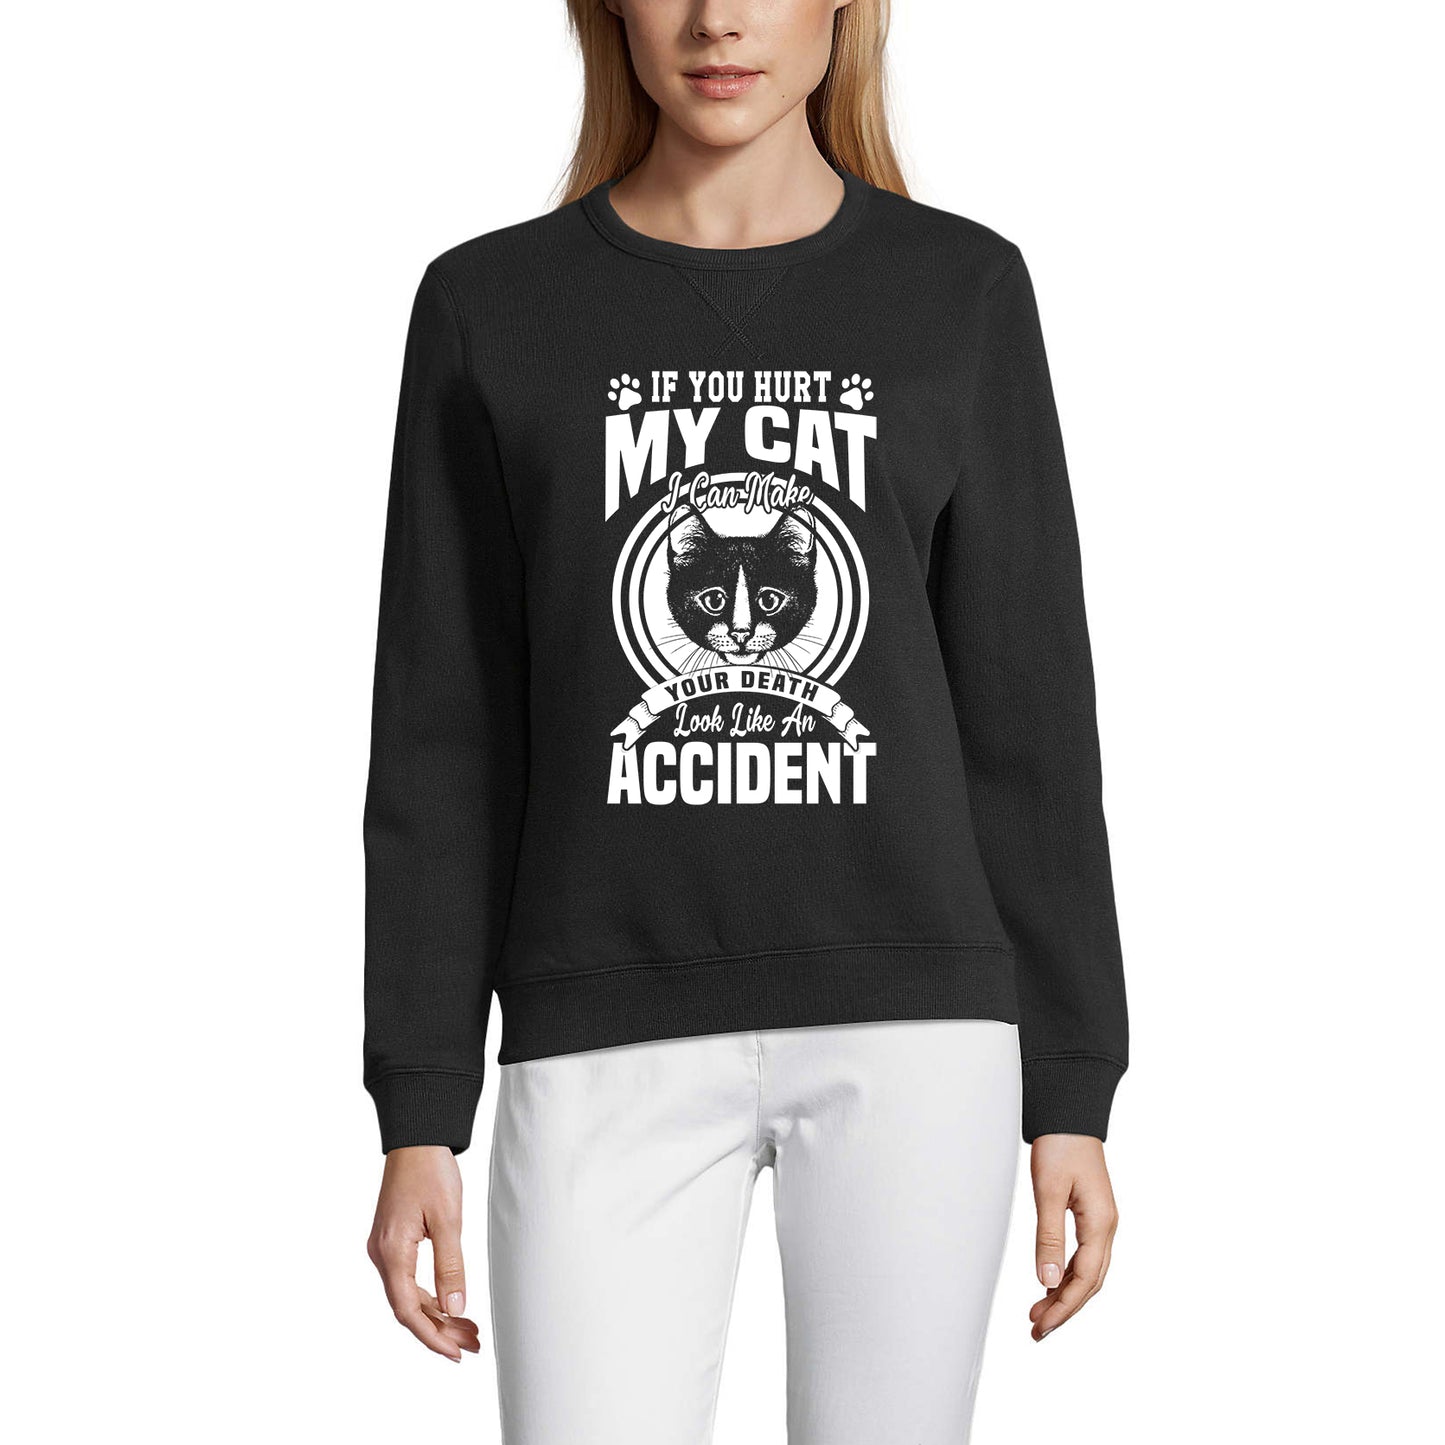 ULTRABASIC Women's Sweatshirt Your Death Look Like An Accident - Sarcastic Quote